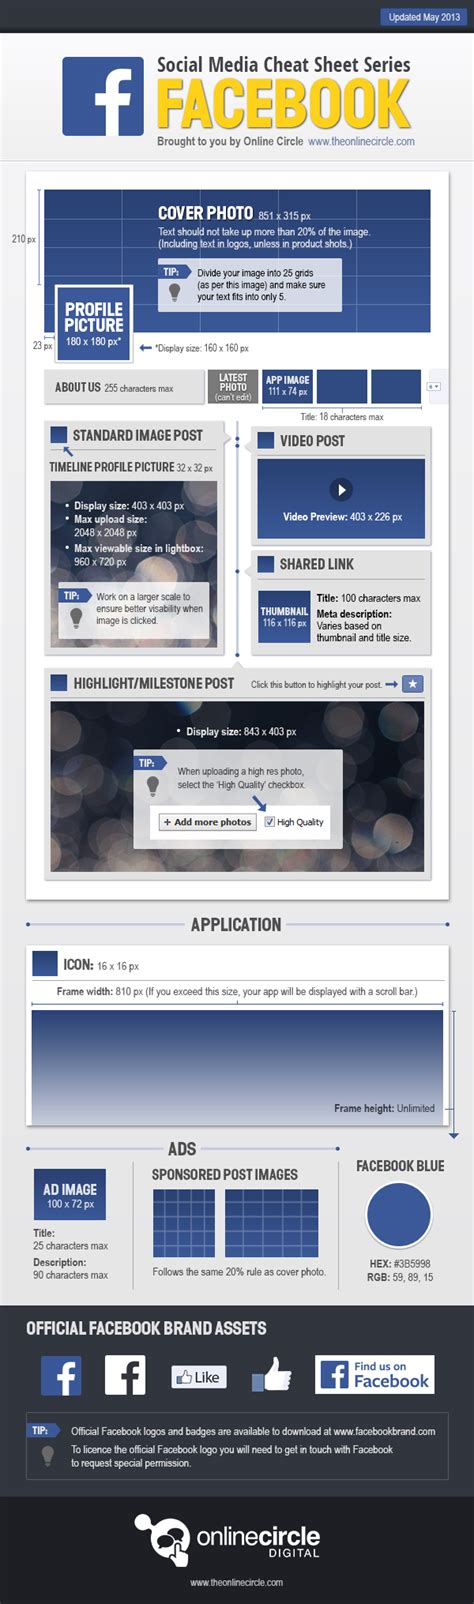 Infographie Social Media Cheat Sheet Series Facebook Time To